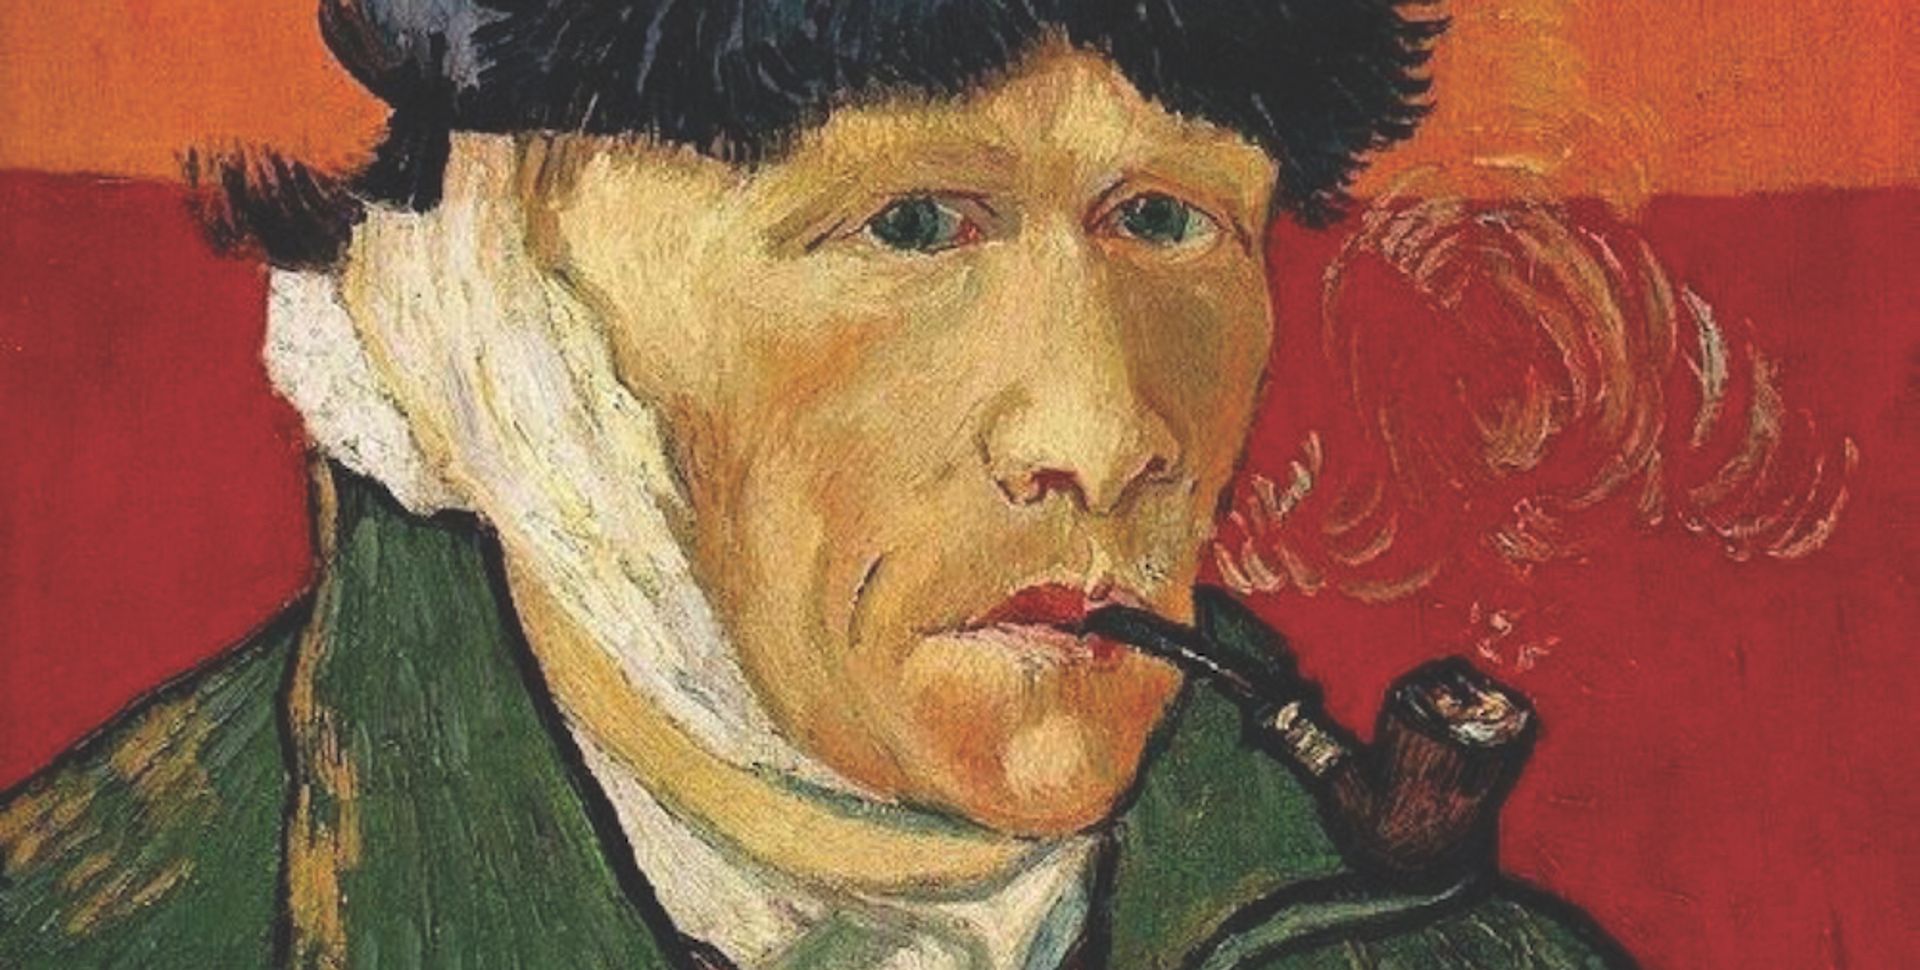 Vincent van Gogh’s Self-portrait with bandaged ear and pipe (1889): "We could have named any figure for it". Courtesy of Niarchos Collection